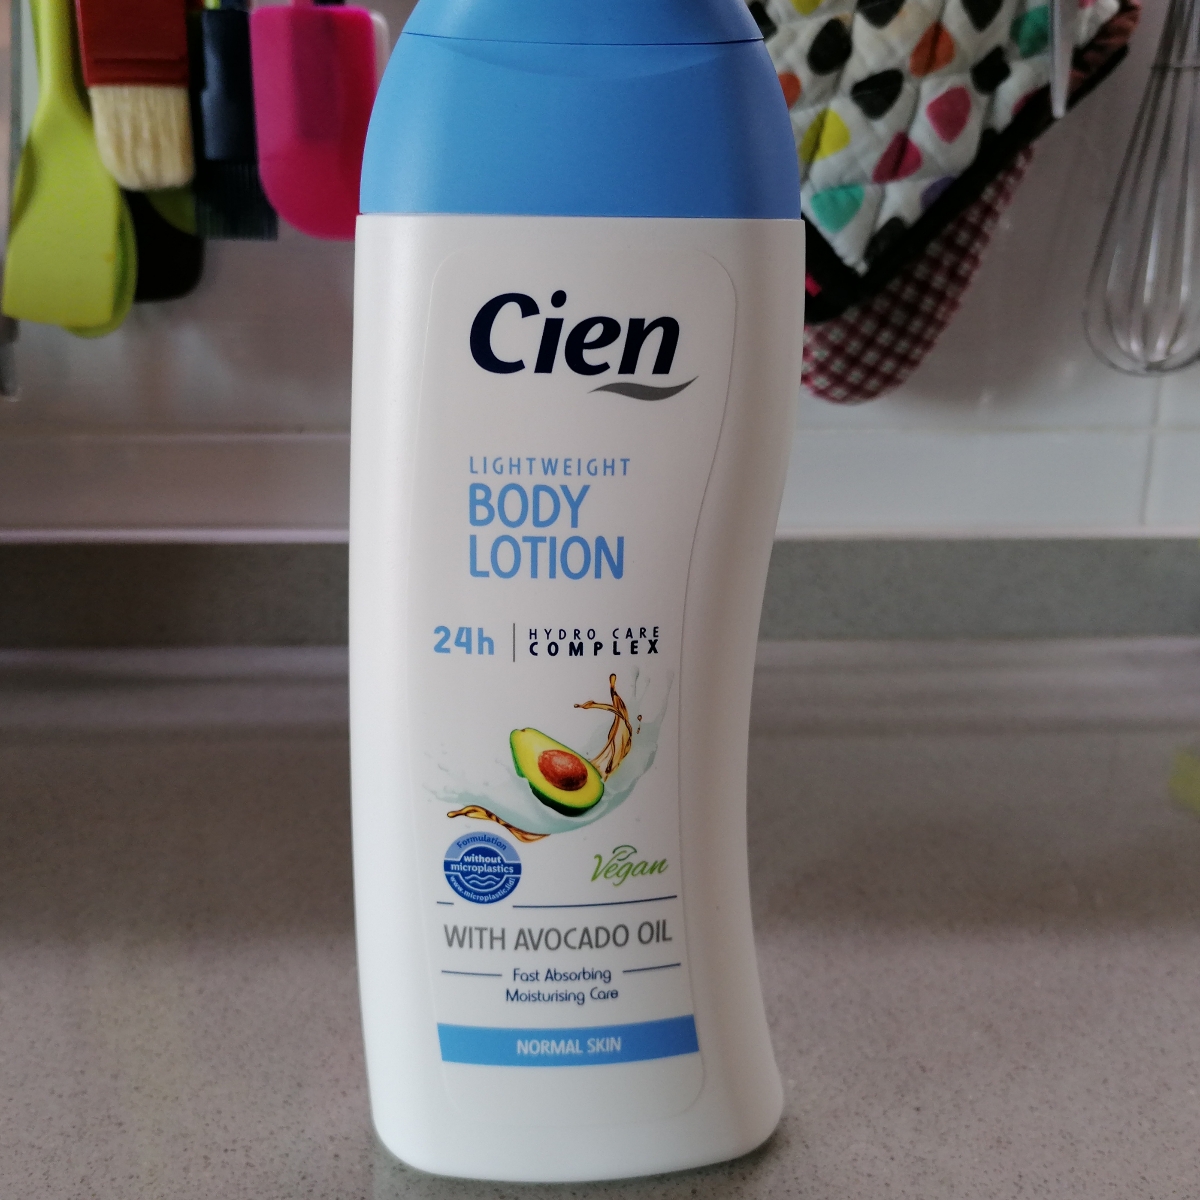 Cien Lightweight Body Lotion with Avocado Oil Review | abillion